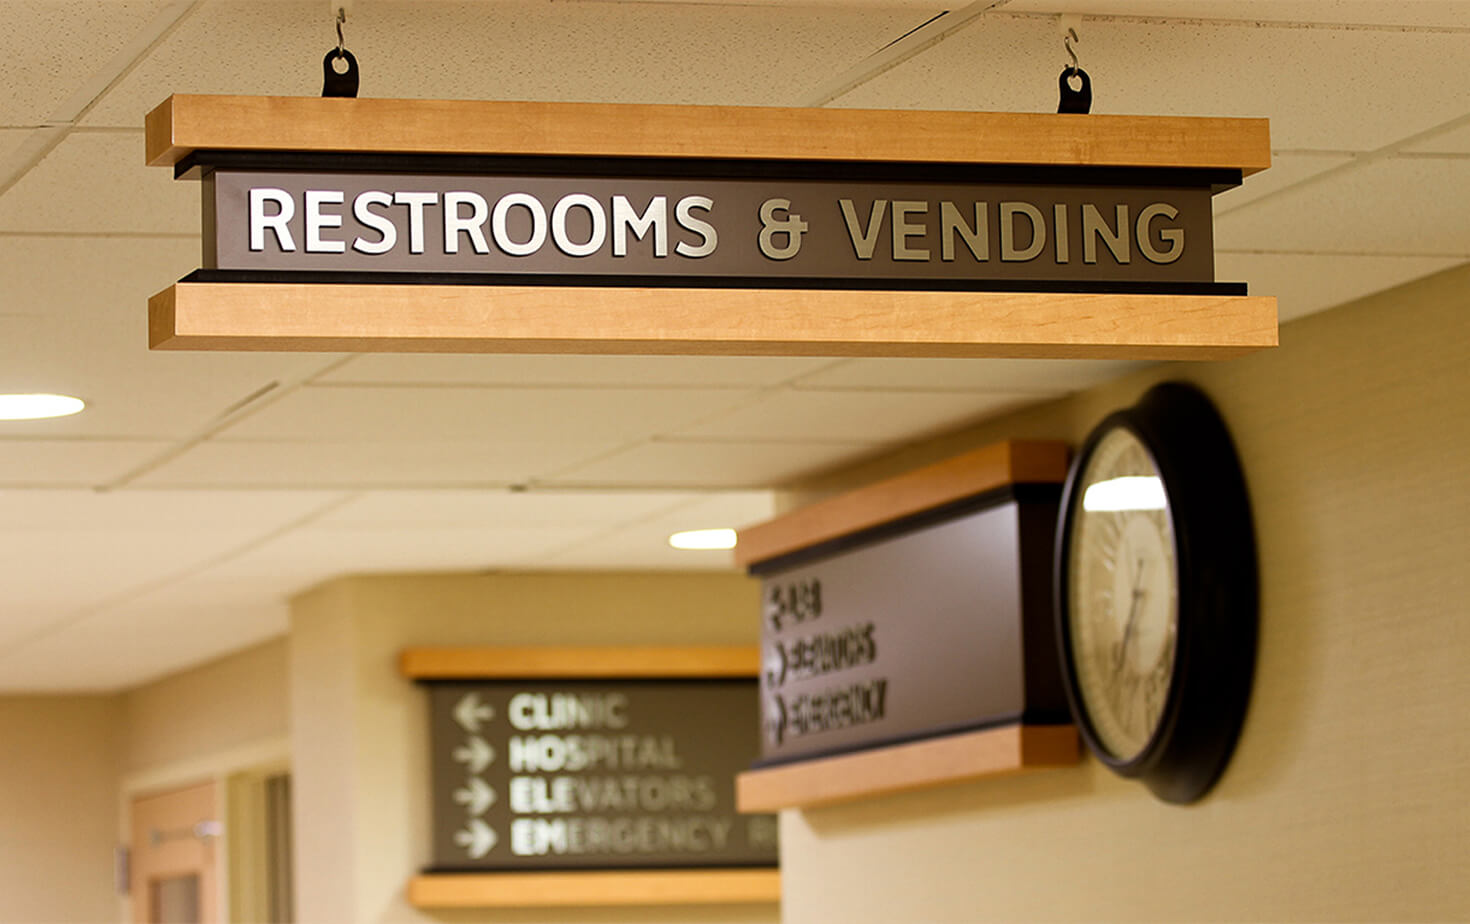 Essentia Health Interior Wayfinding Wall Sign with Wooden accents